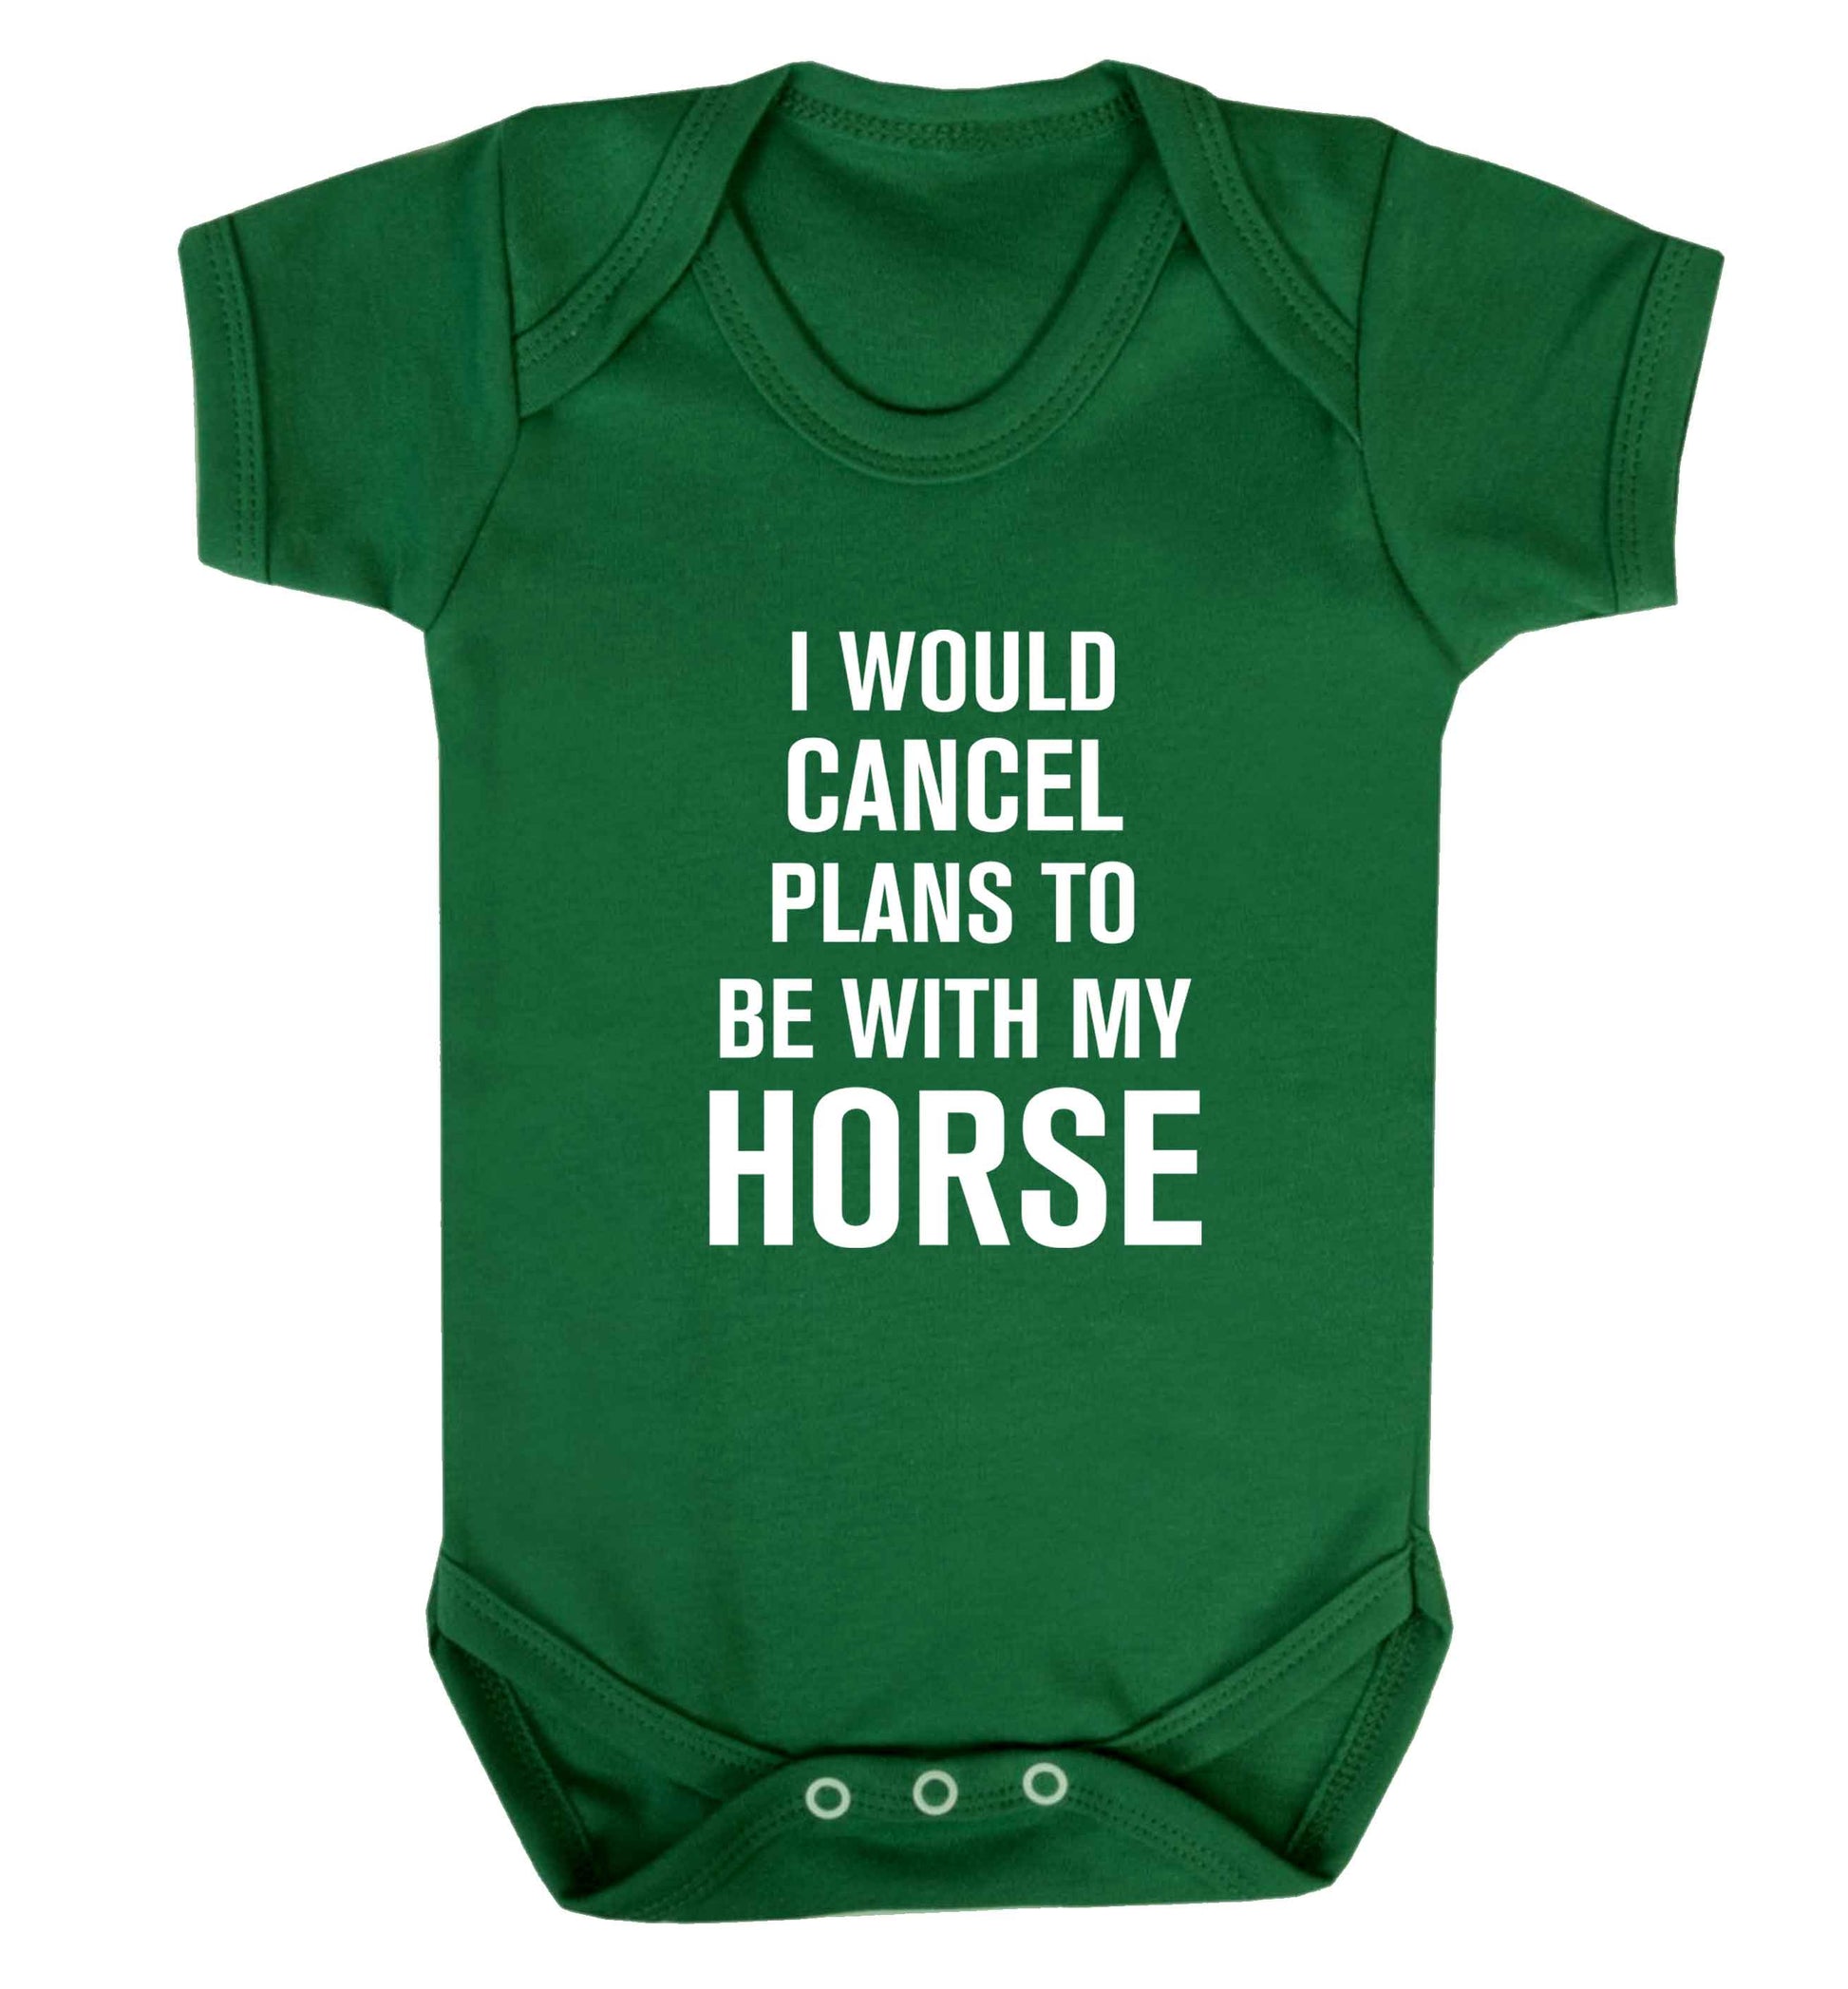 I will cancel plans to be with my horse baby vest green 18-24 months